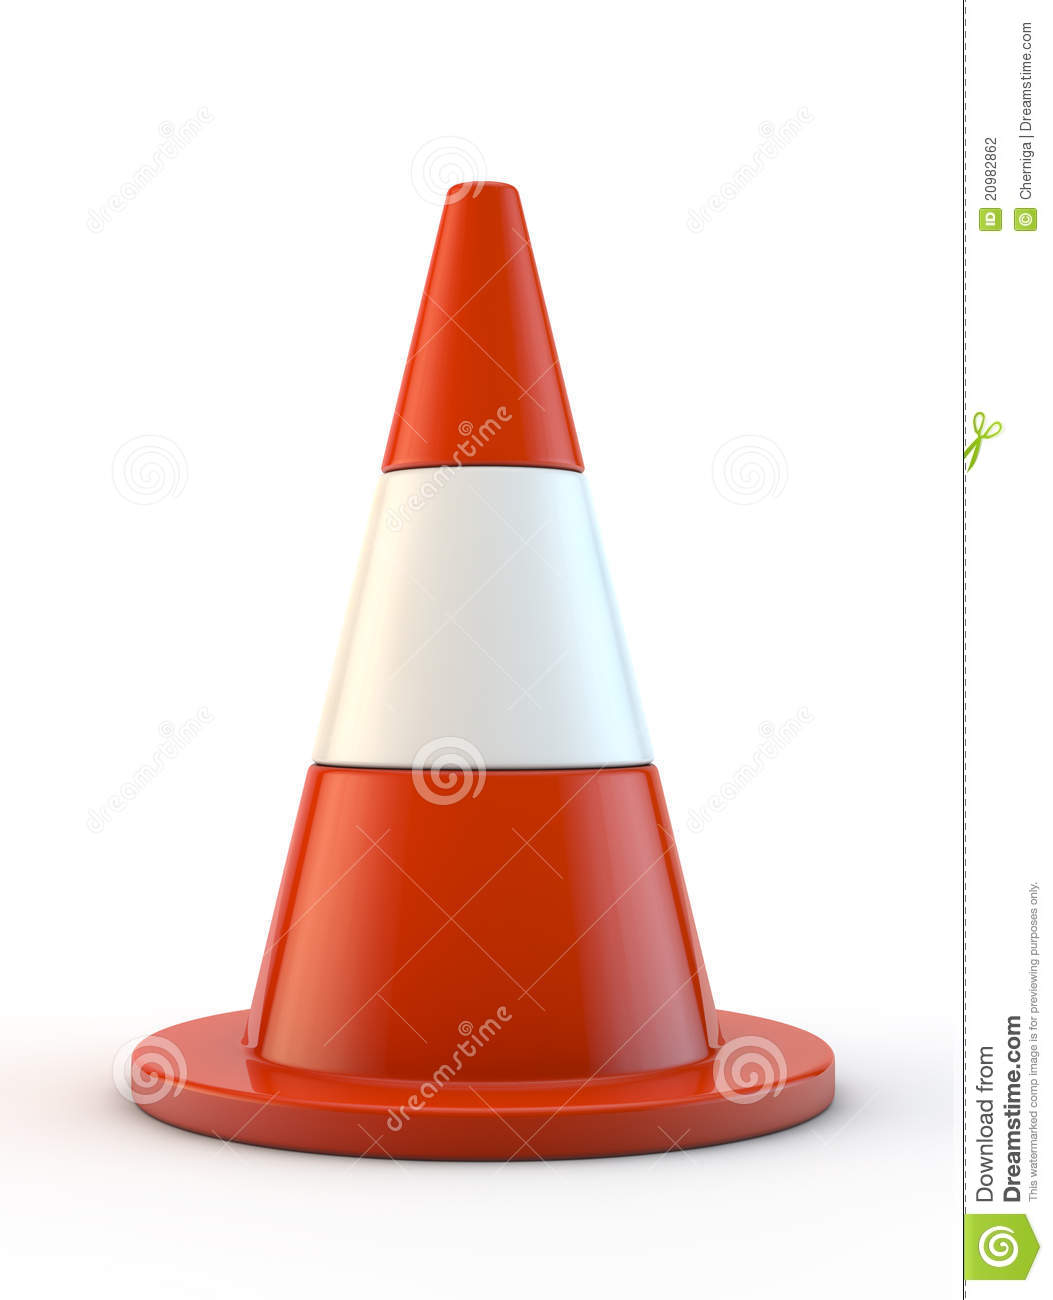 Traffic Cones  3d Image On White Background